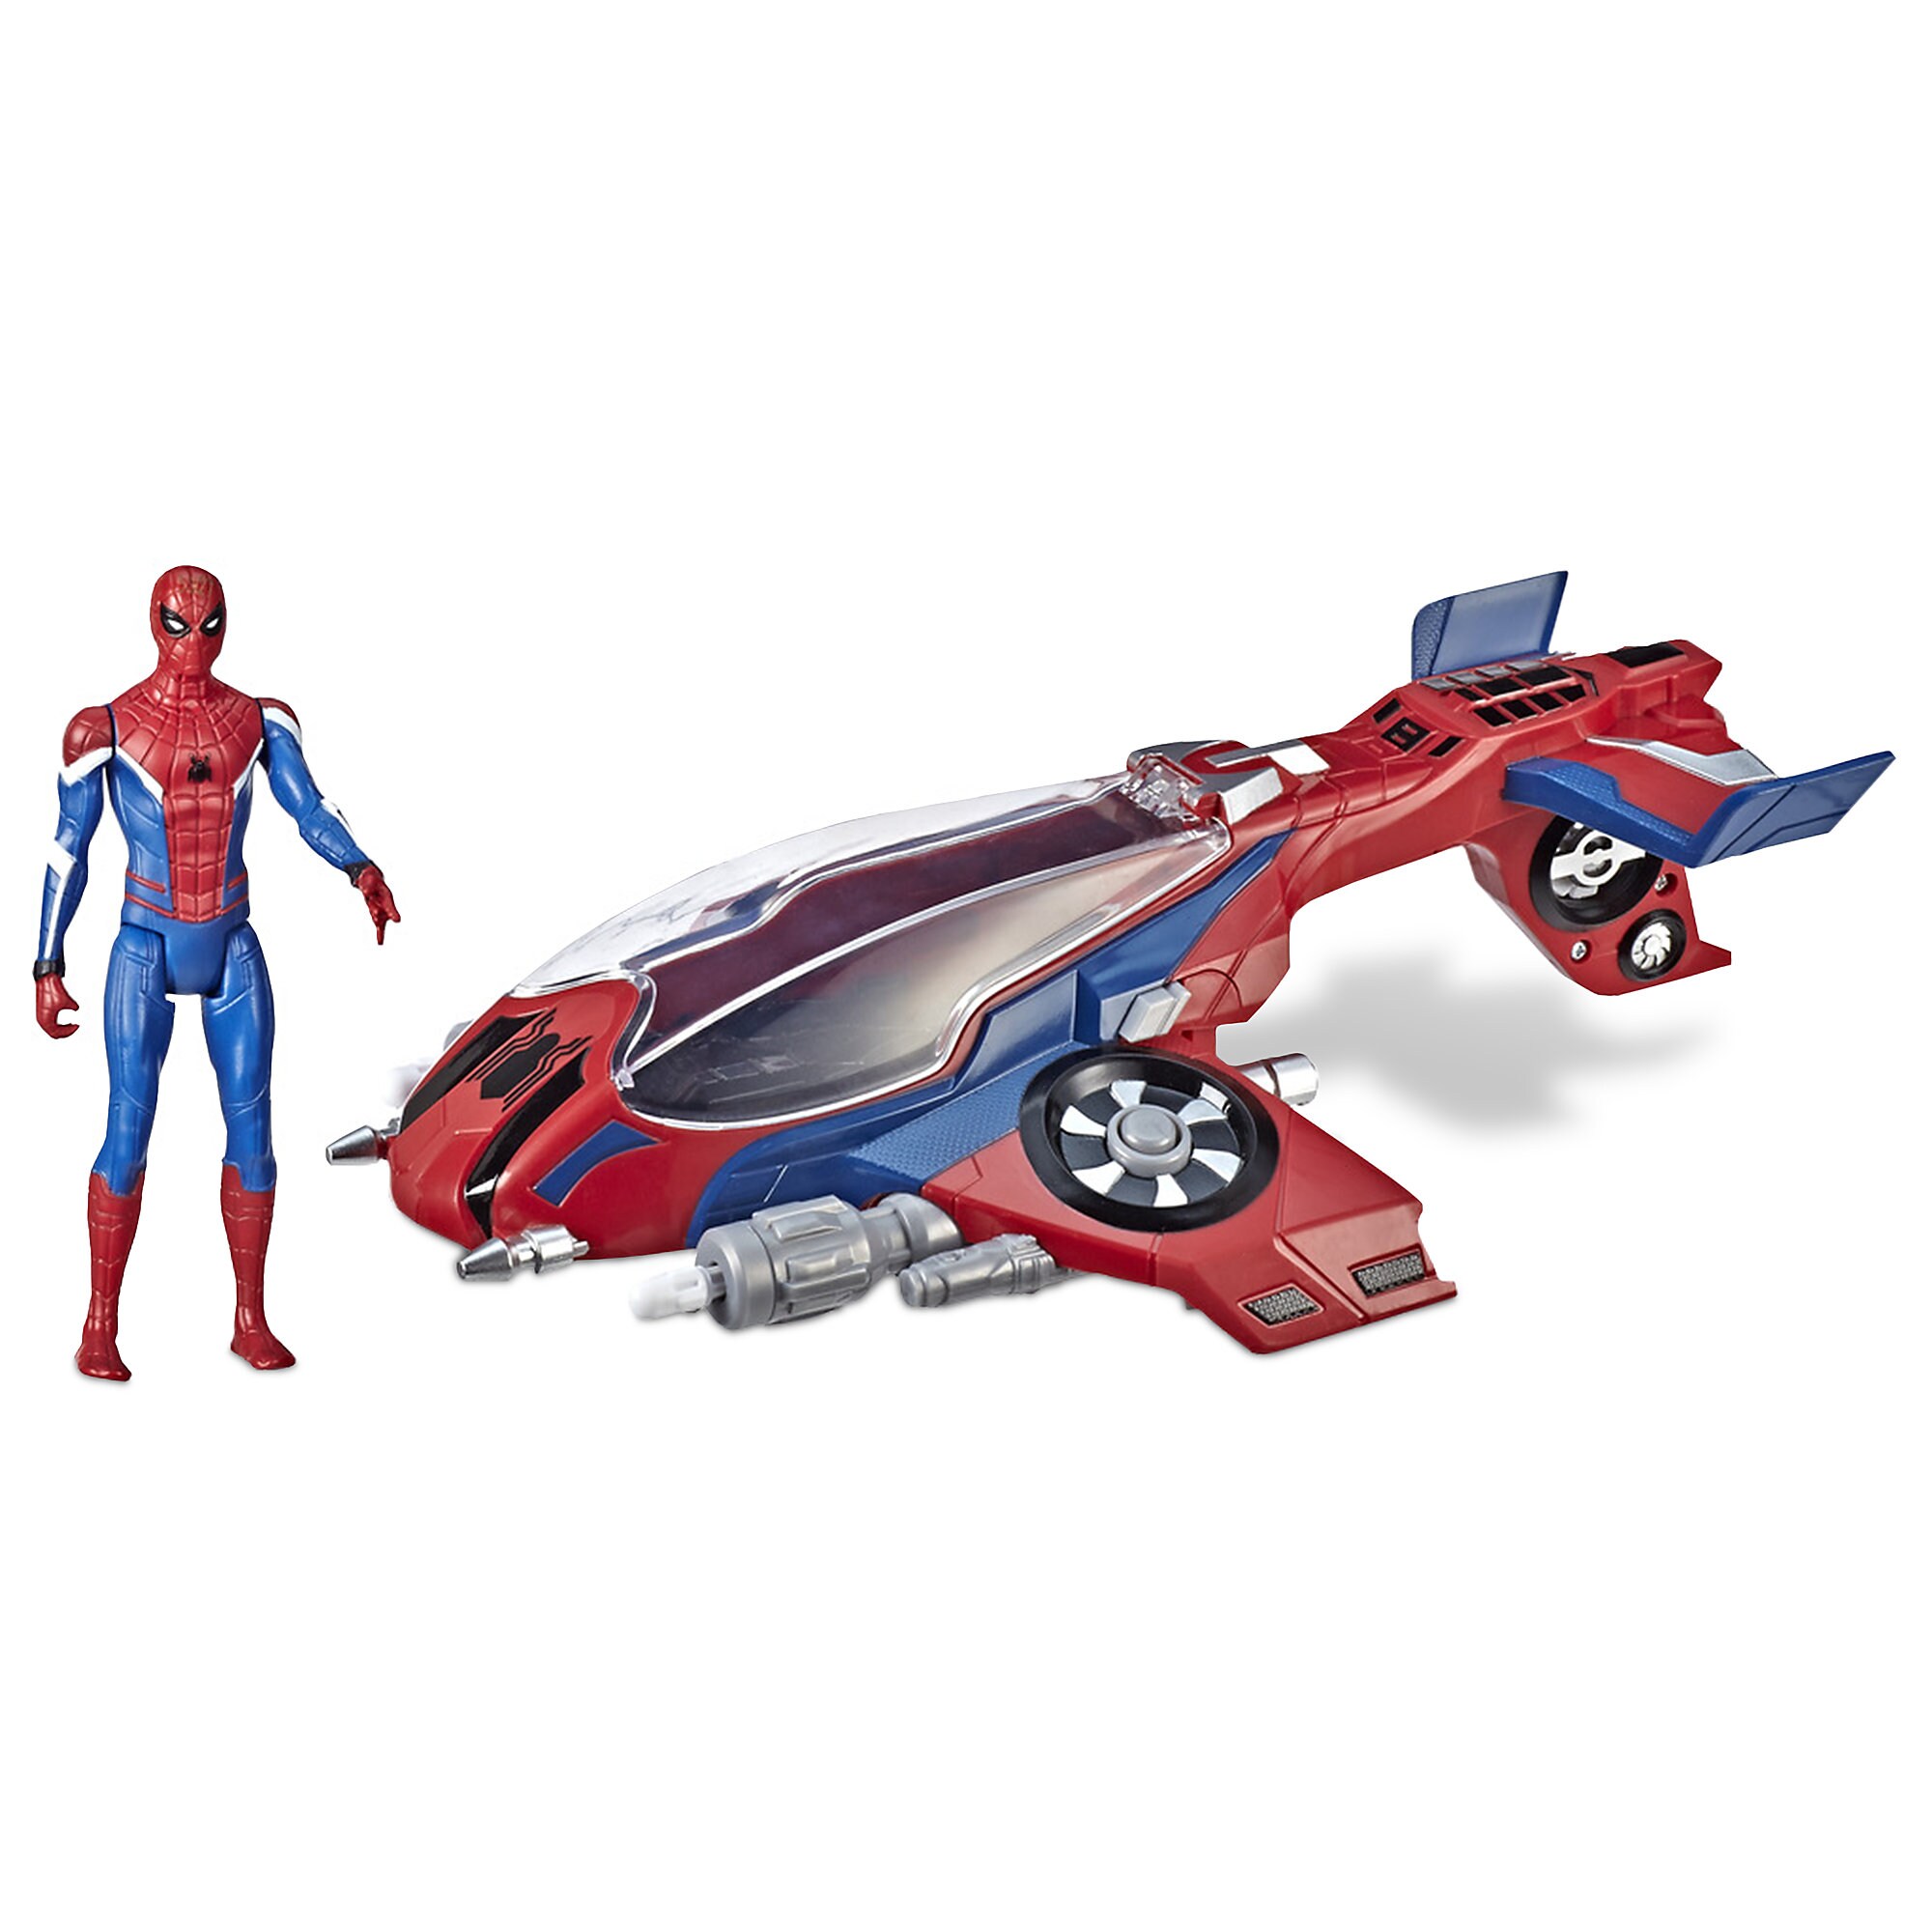 Spider-Man: Far From Home Action Figure with Spider-Jet Vehicle